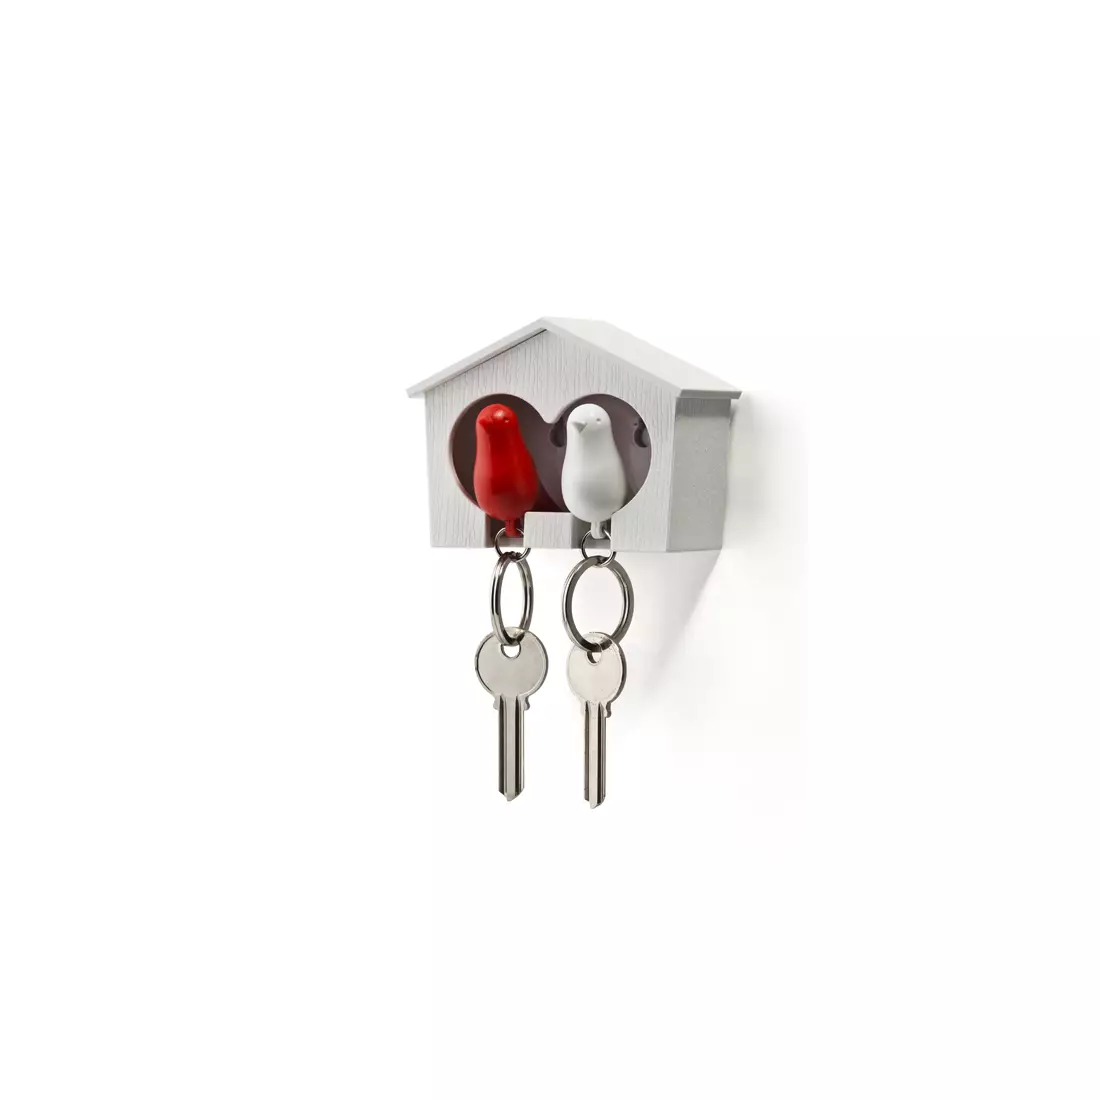 QUALY key hanger, duo sparrow, white and red